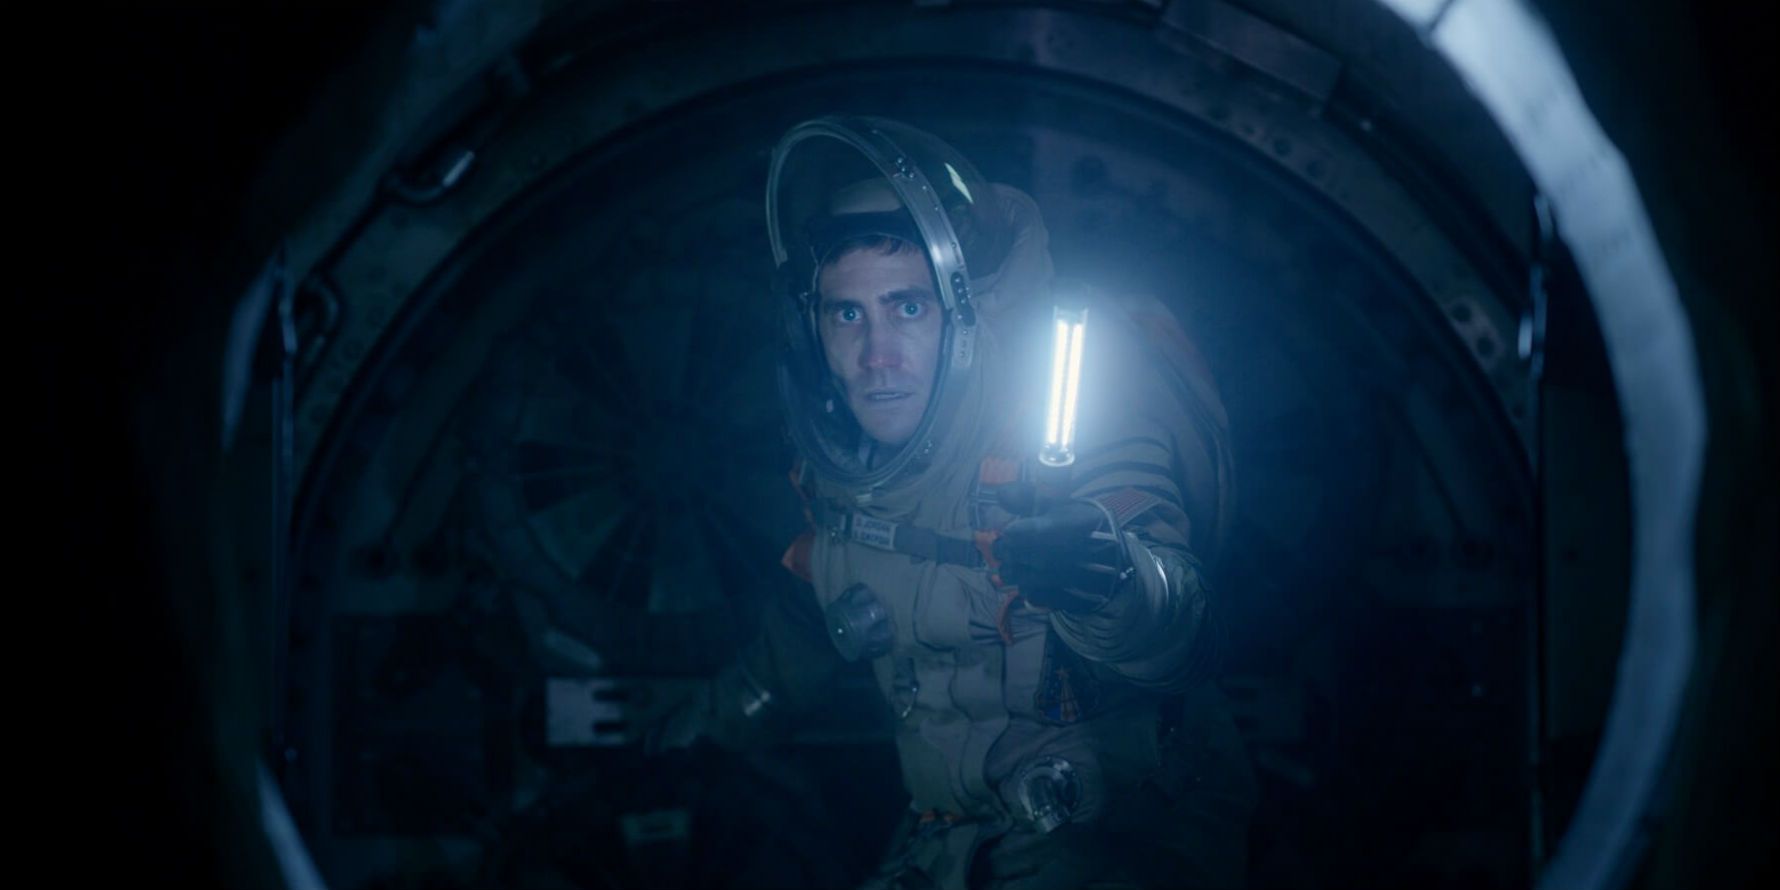 Jake Gyllenhaal in a space suit shining a light in Life